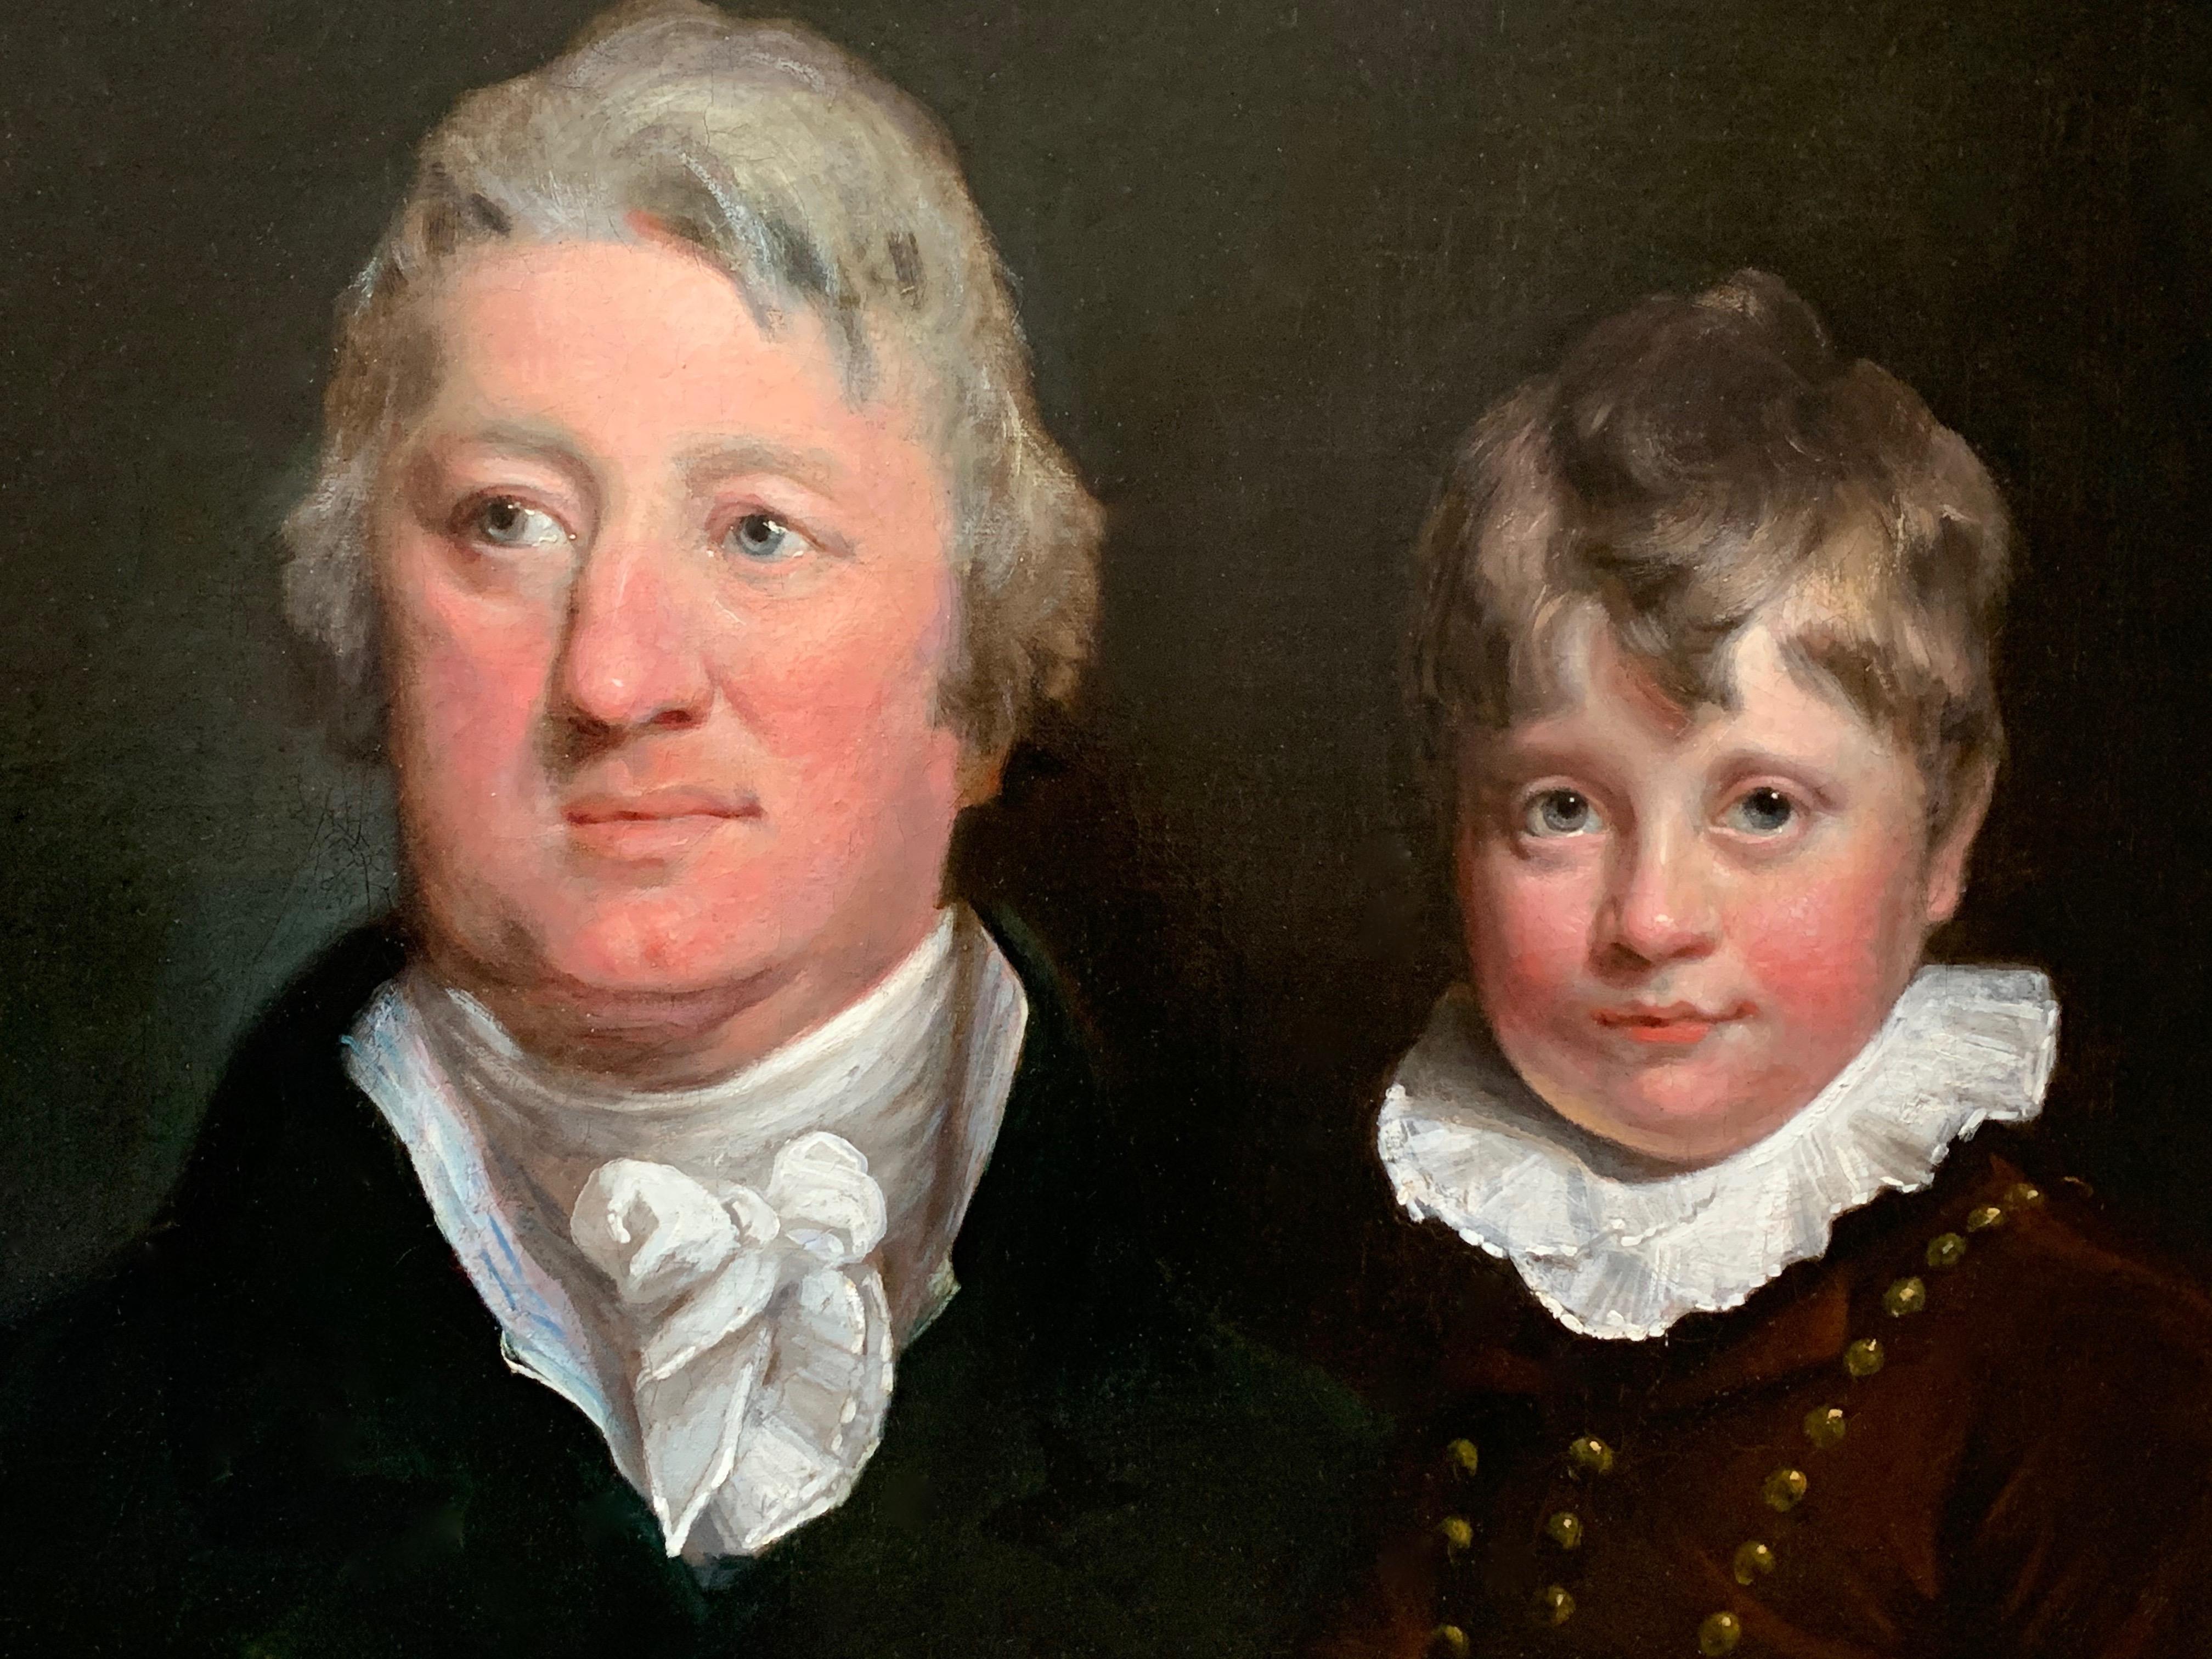 Joseph Clover  Figurative Painting - Early 19th Century English Oil Portrait Painting of a Gentleman and a Young Boy.